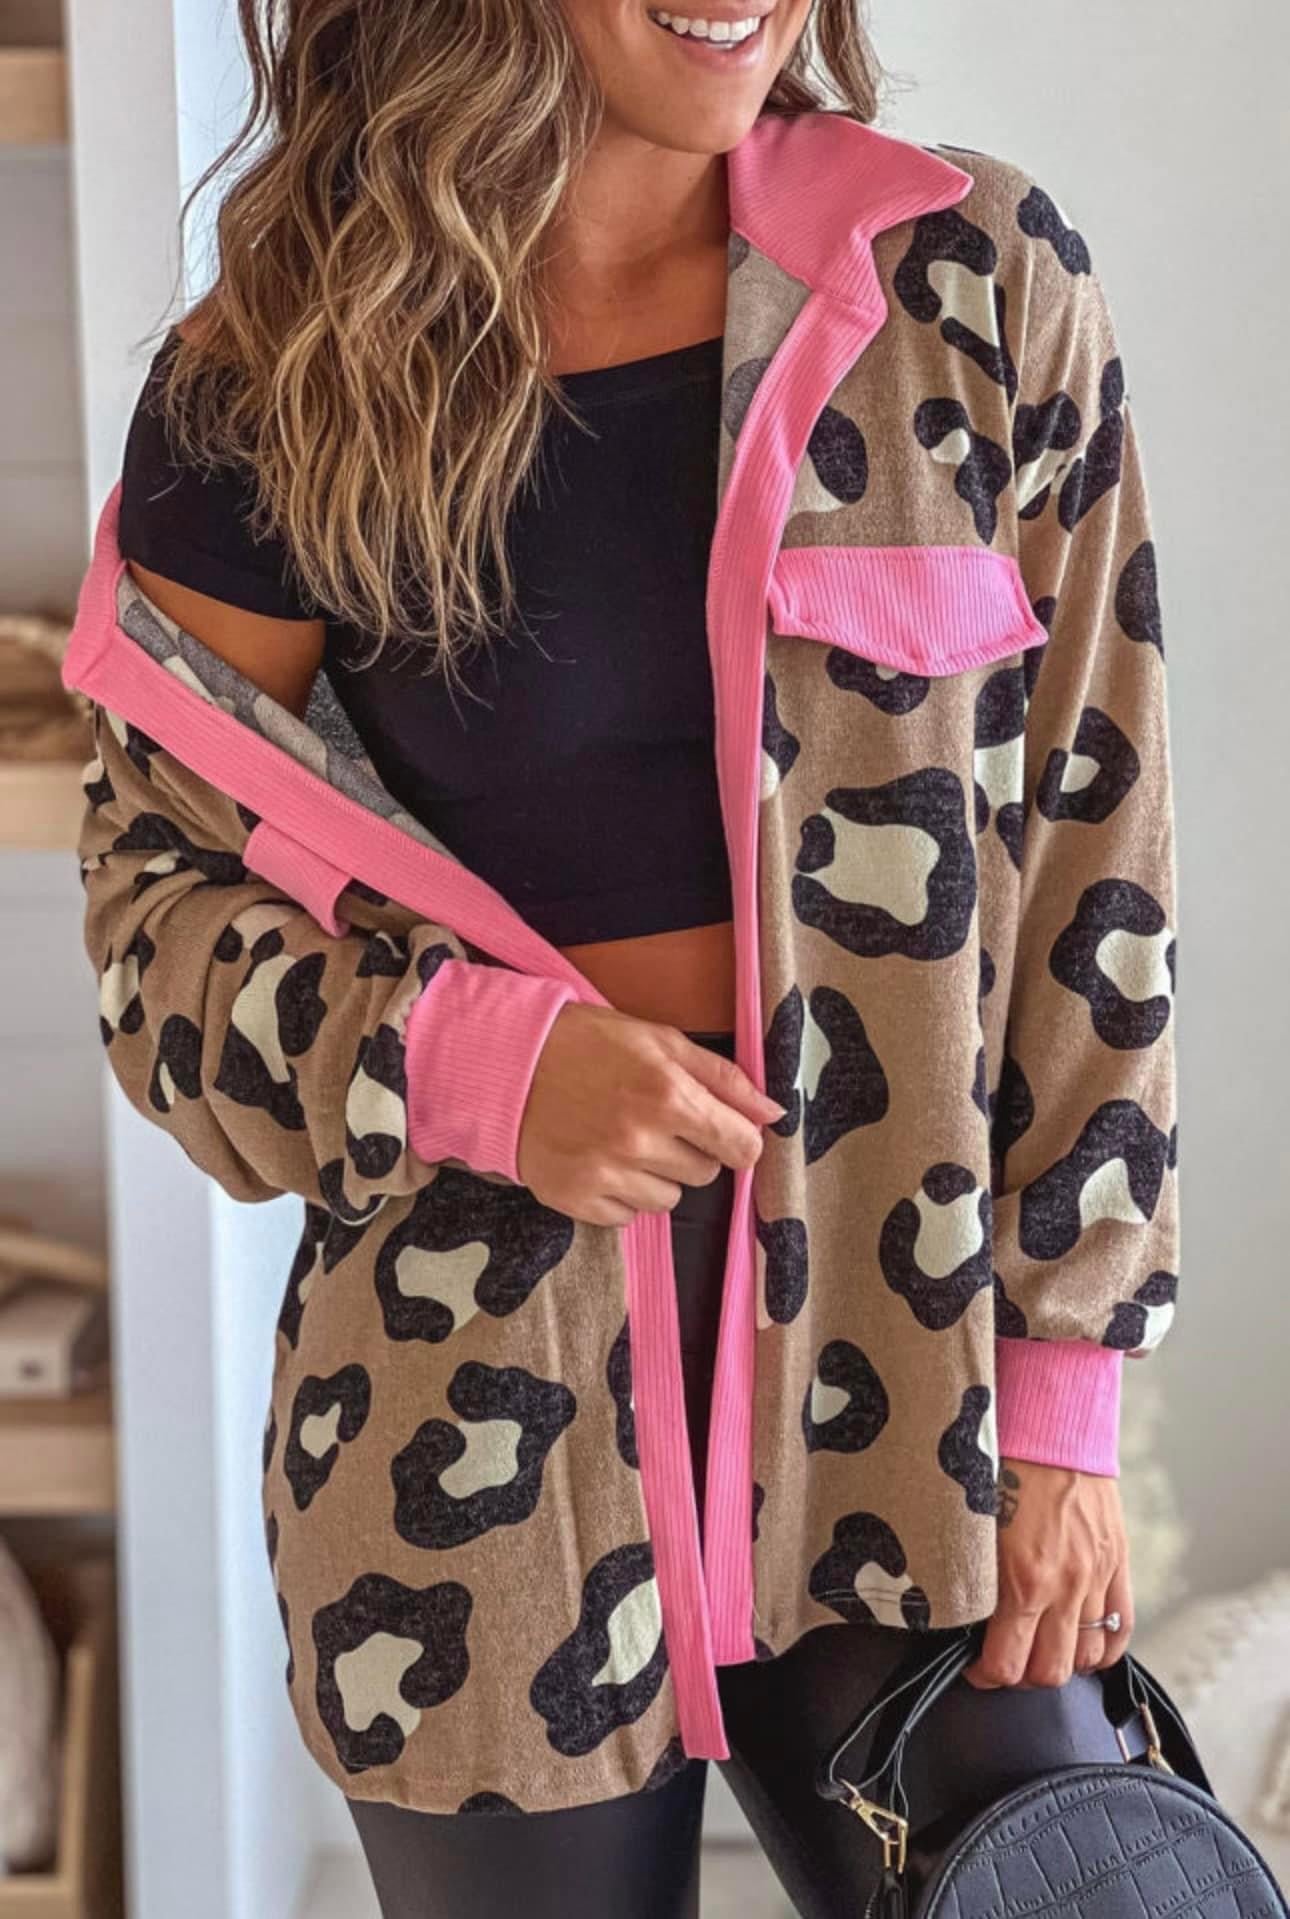 CHEETAH AND PINK CARDIGAN - CountryFide Custom Accessories and Outdoors